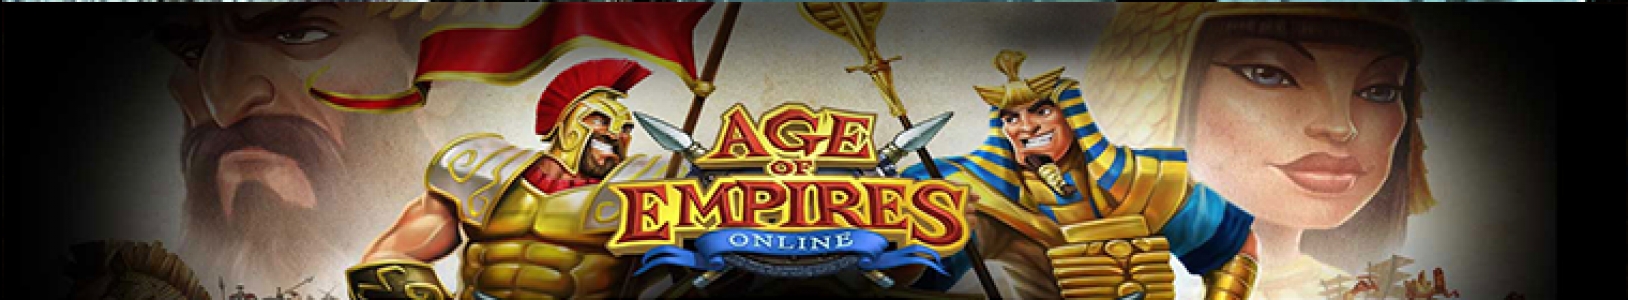 Age of Empires Online banner